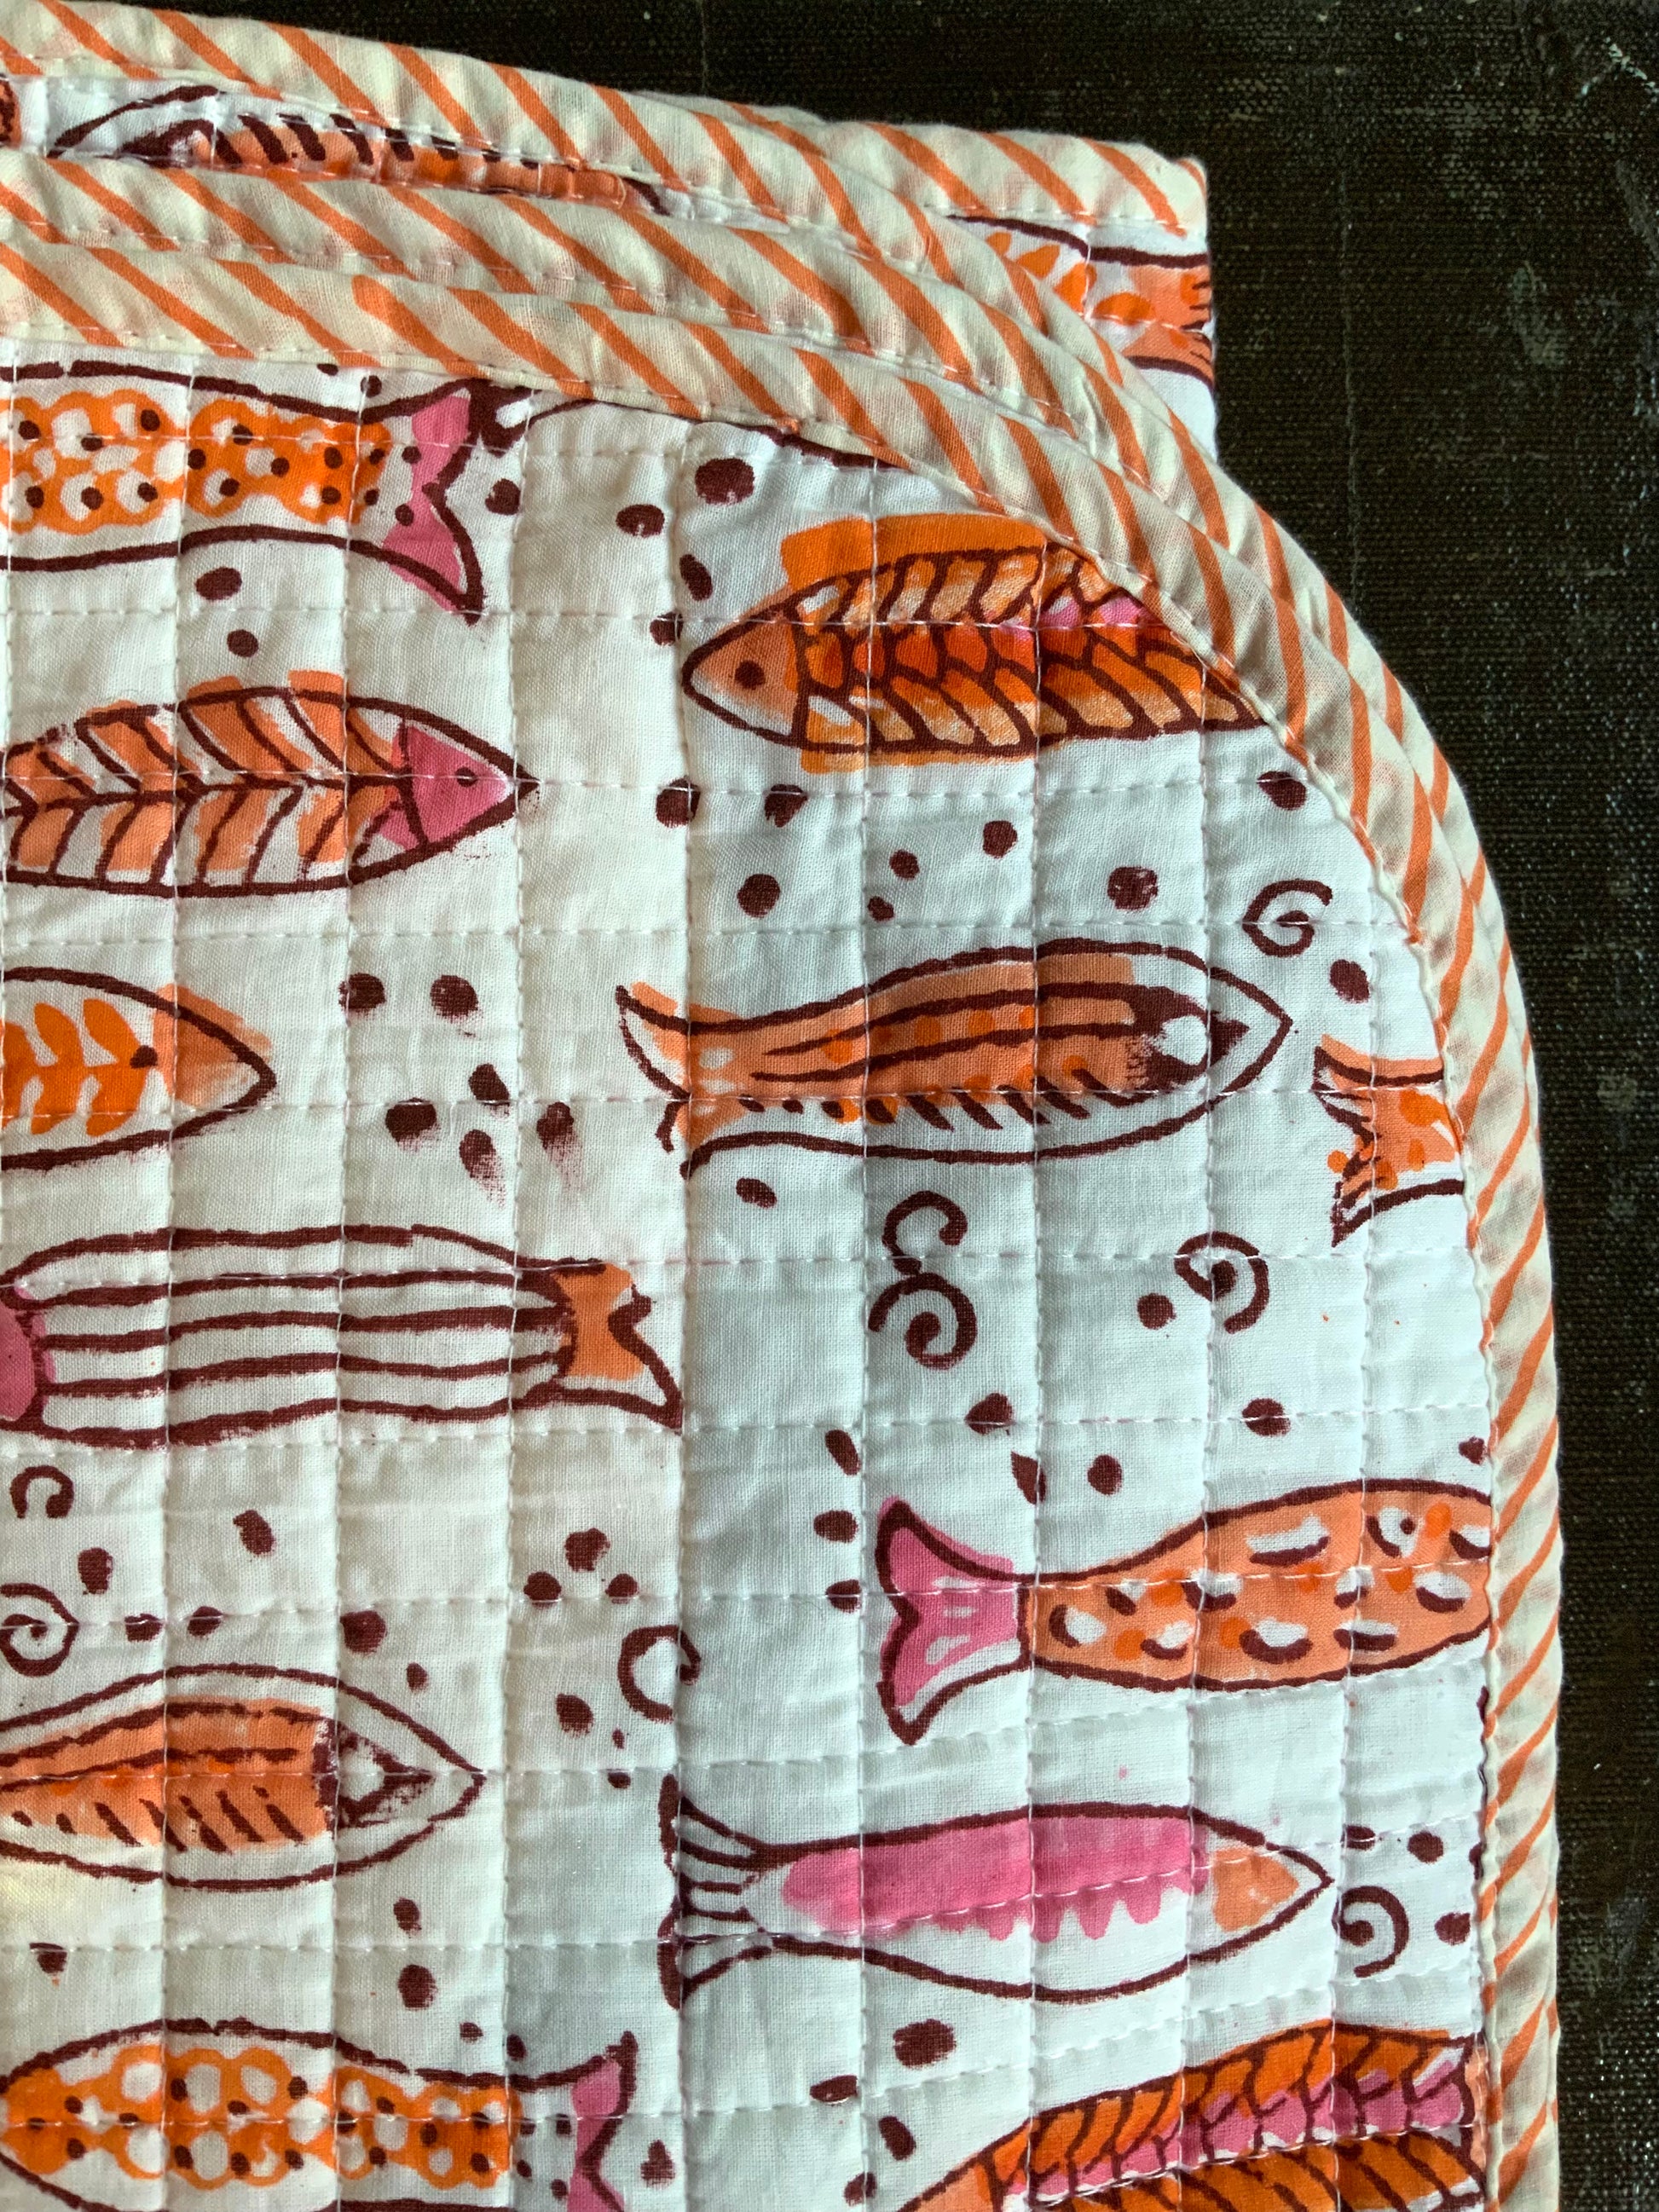 White baby blanket with colorful fish in red and orange #cuteasacatch 💕 - DharBazaar